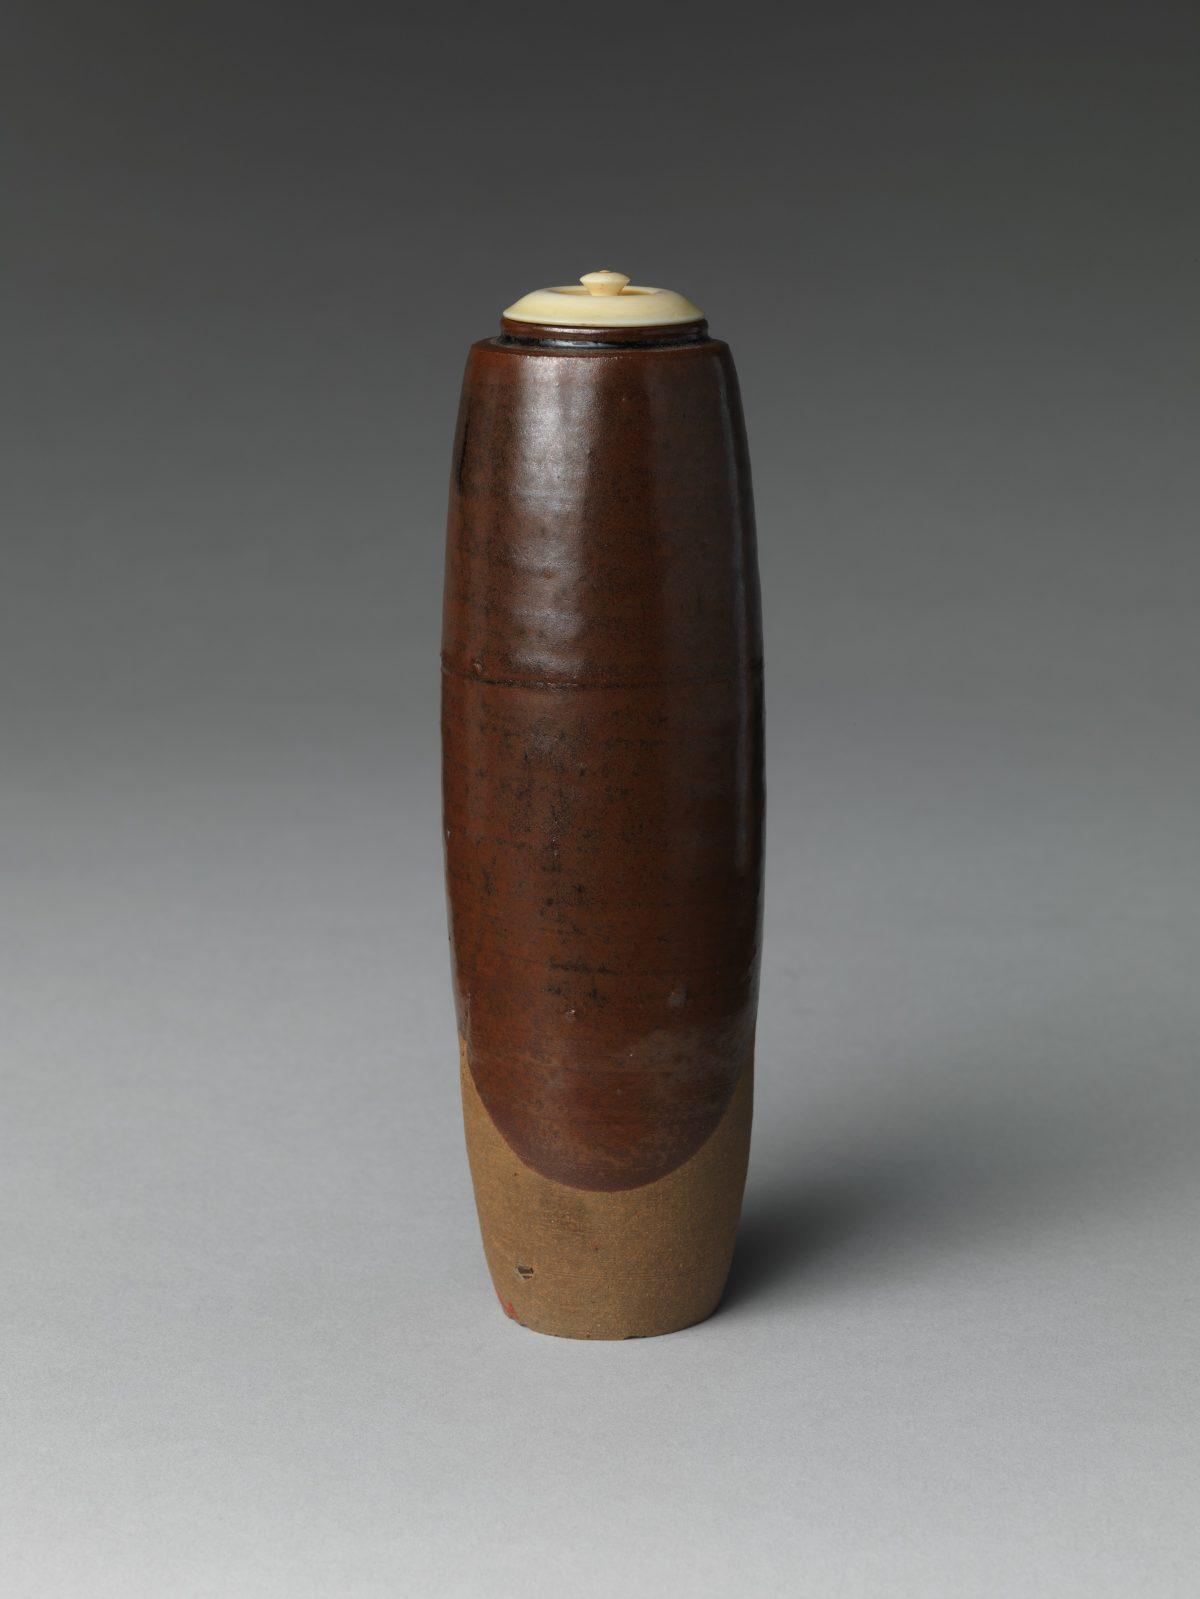 Tea caddy (seitaka), Edo period (1615–1868), dated 1650. This small jar was used in tea ceremonies to hold matcha. It was created by Nonomura Ninsei, one of the first Japanese potters to sign his name to his work. The Howard Mansfield Collection, gift of Howard Mansfield, 1936. (The Metropolitan Museum of Art)